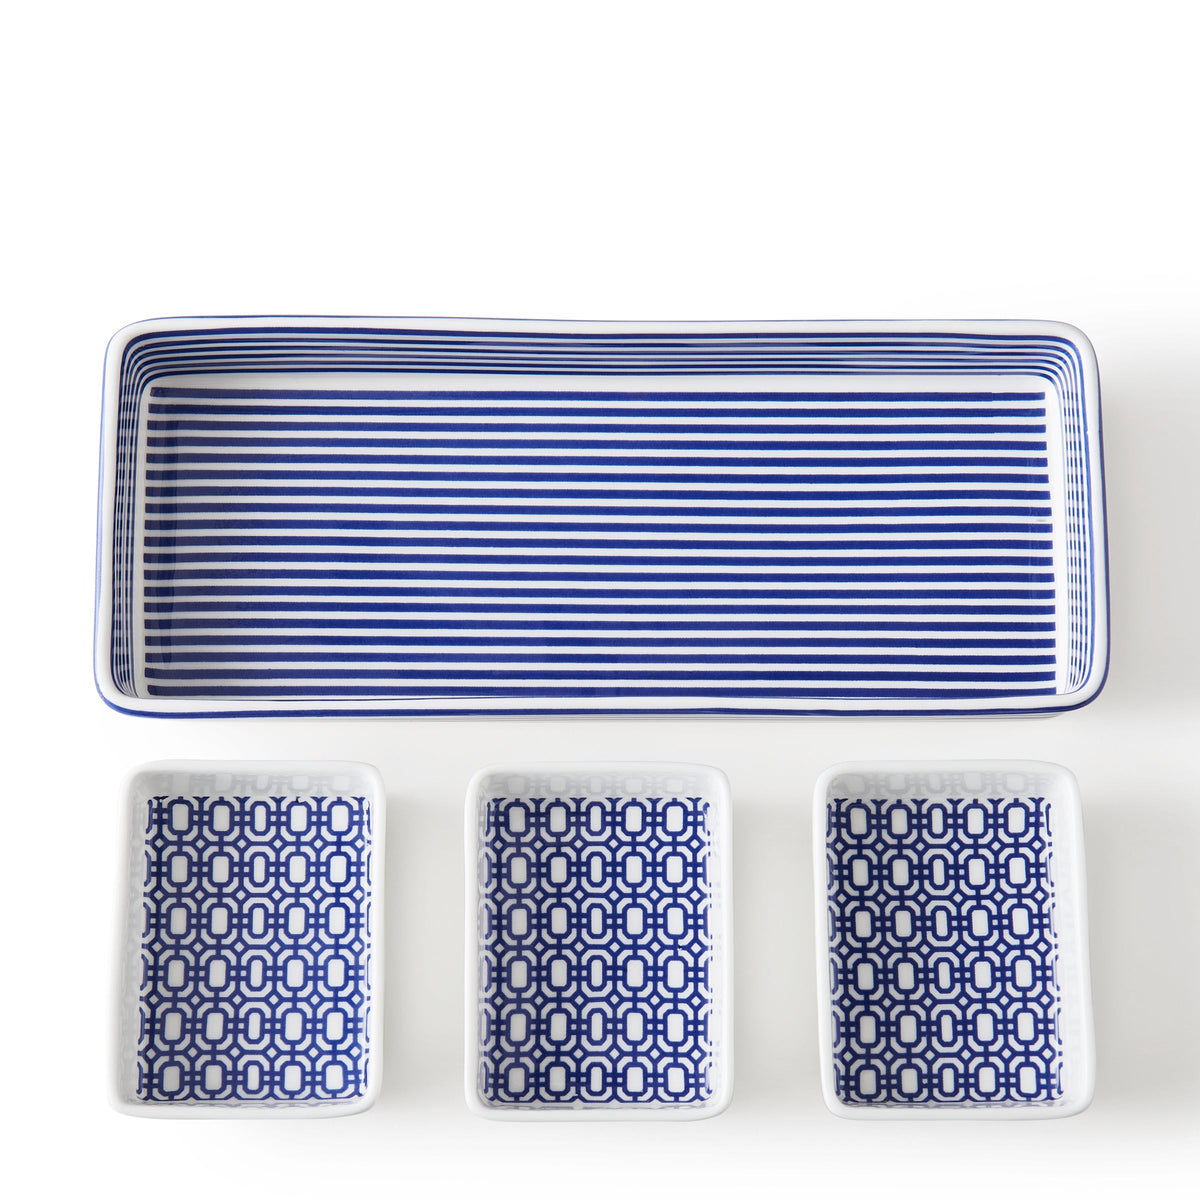 A Caskata Newport nested appetizer tray set with three small bites dishes, perfect for serving crudités.